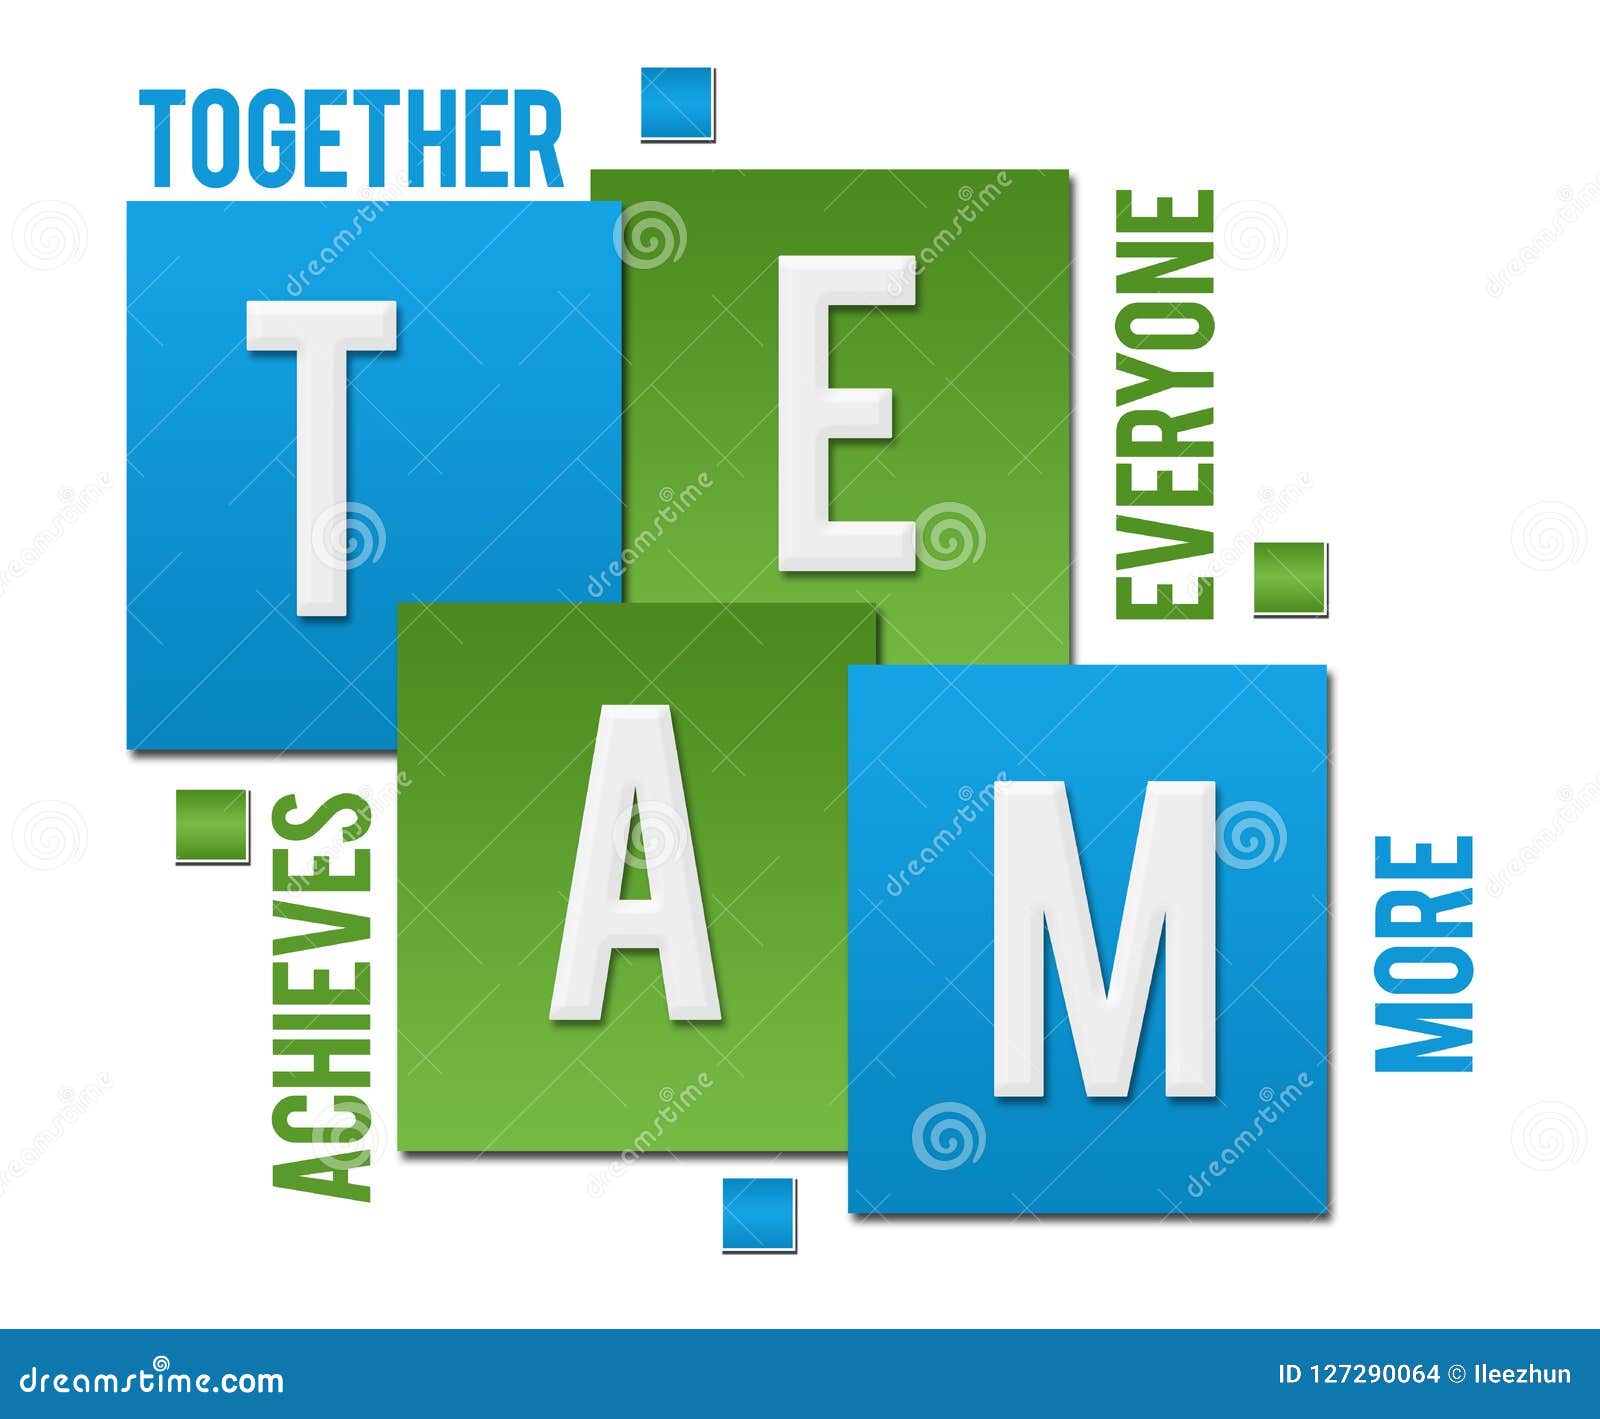 team - together everyone achieves more green blue squares text